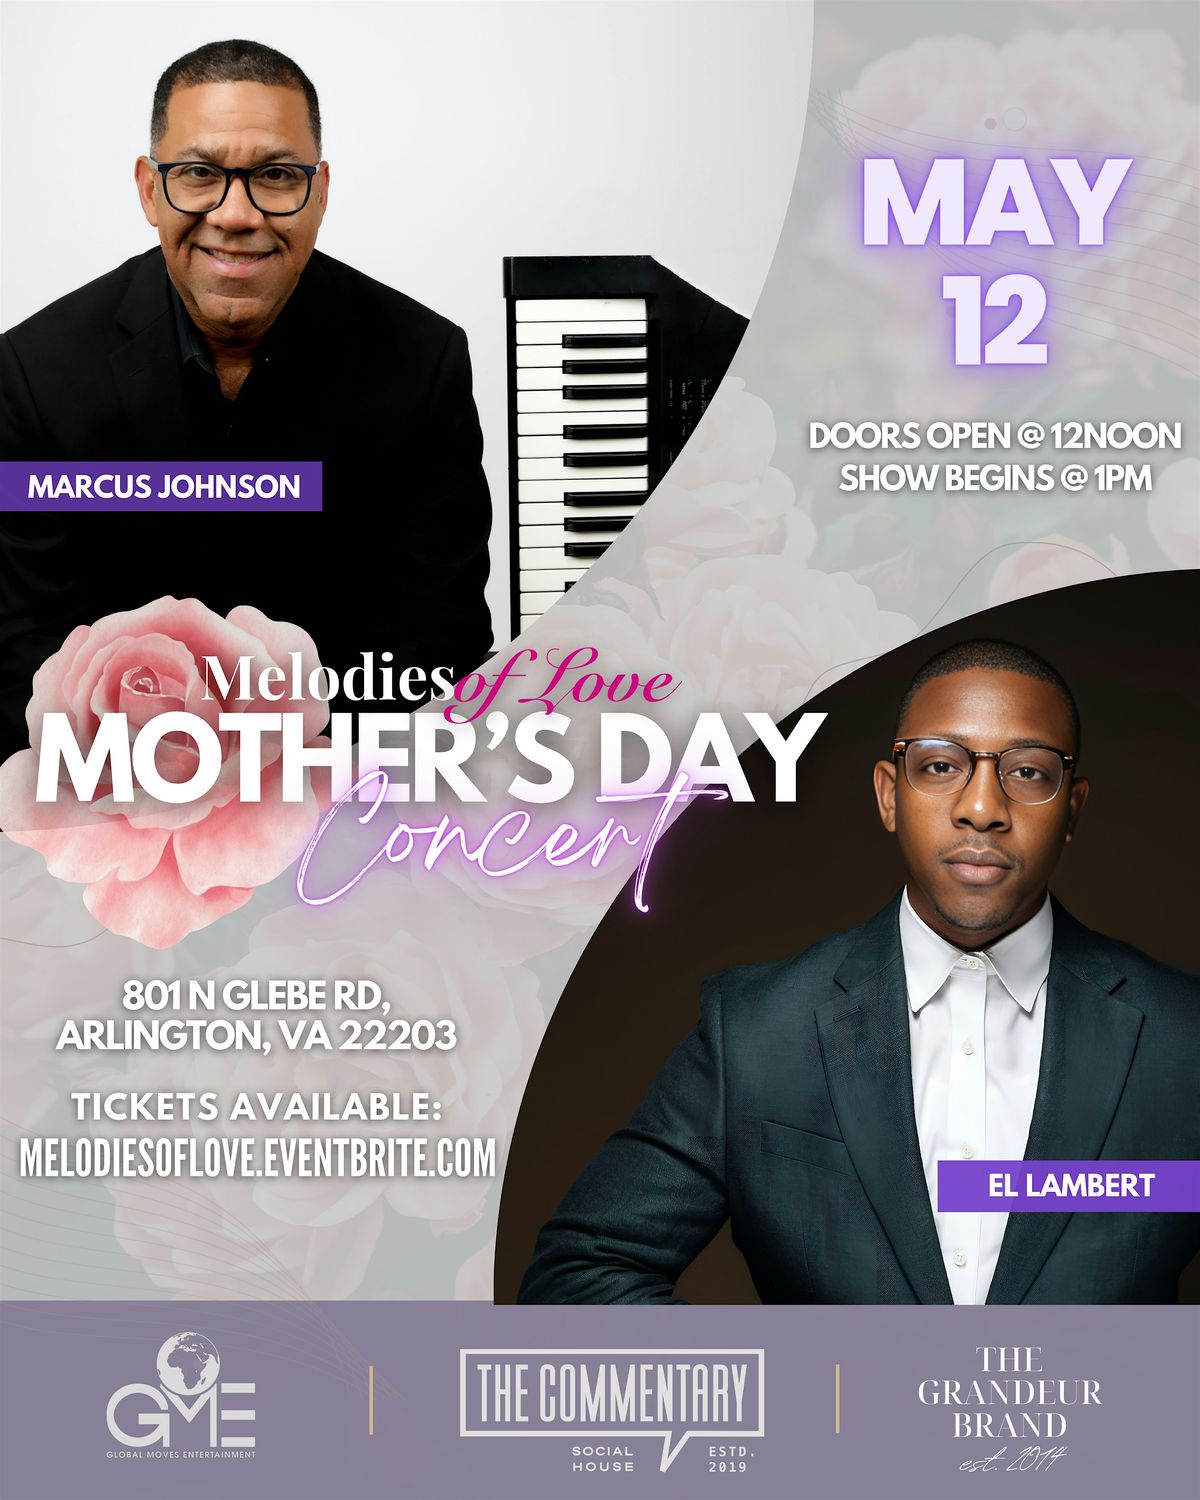 "Melodies of Love" Mothers Day Concert